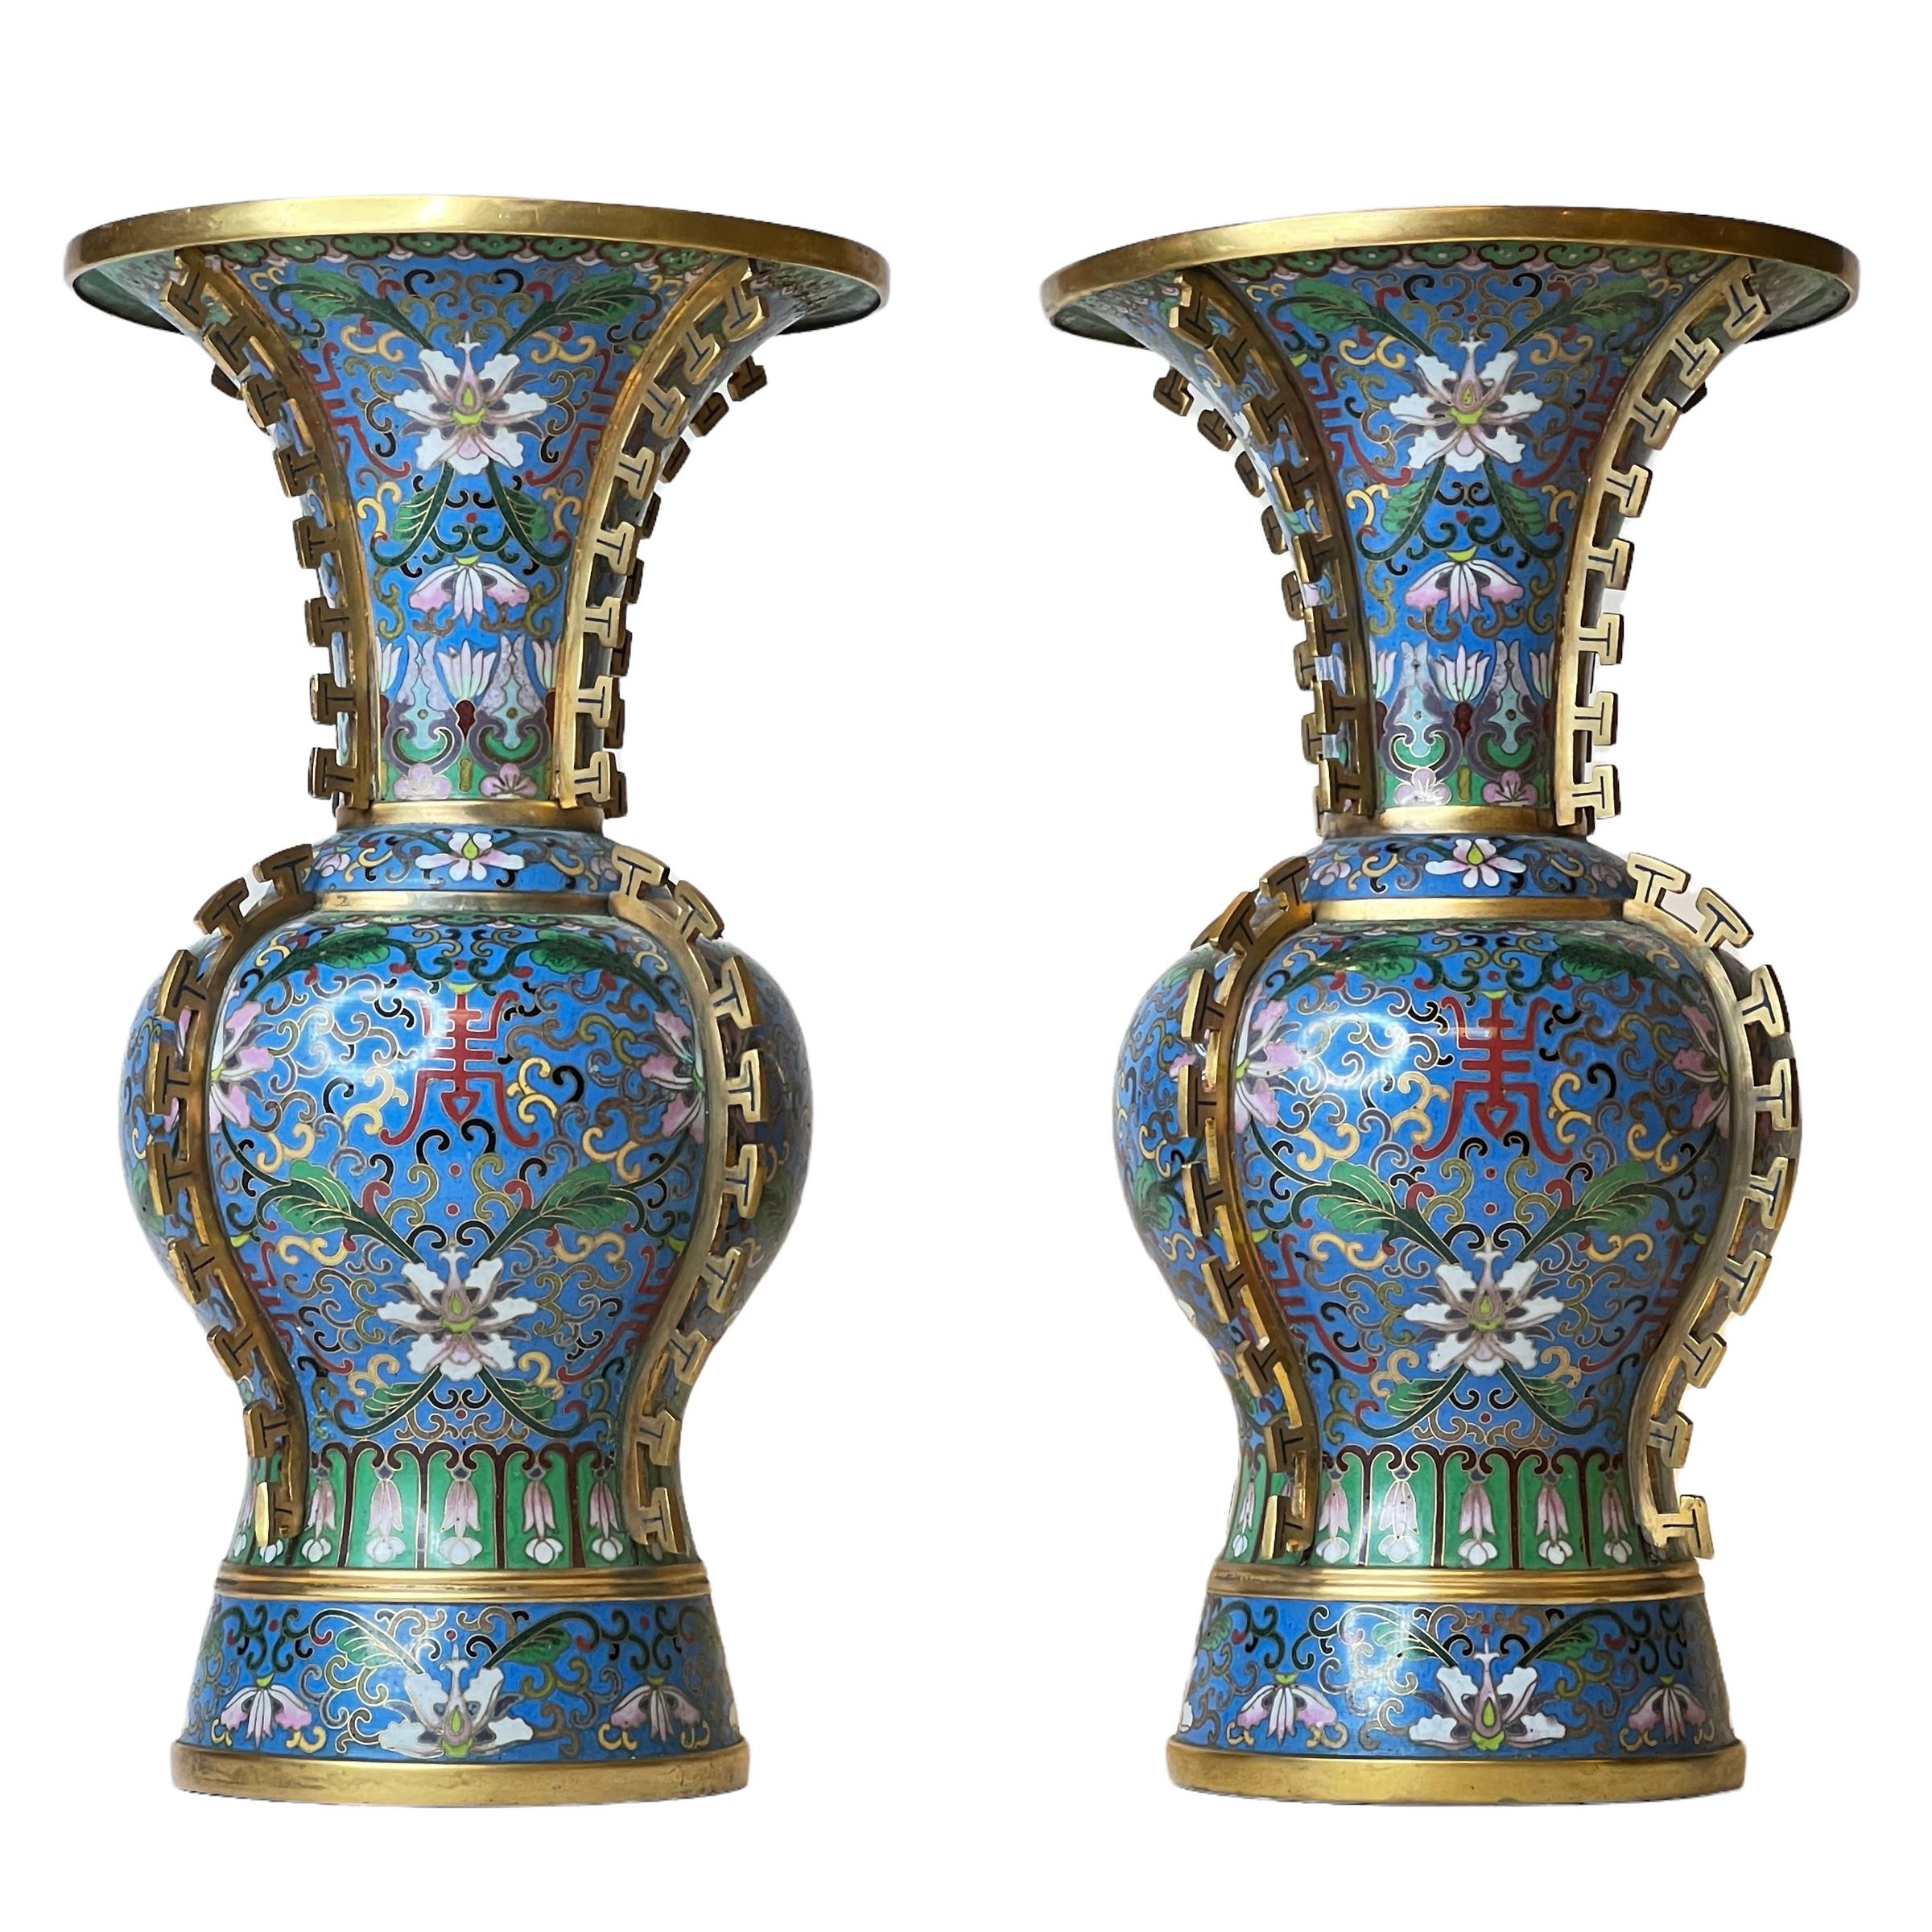 Pair Chinese cloisonne enamel vases with floral designs on blue ground and gilt mounts representing stylized dorsal fins of a dragon.